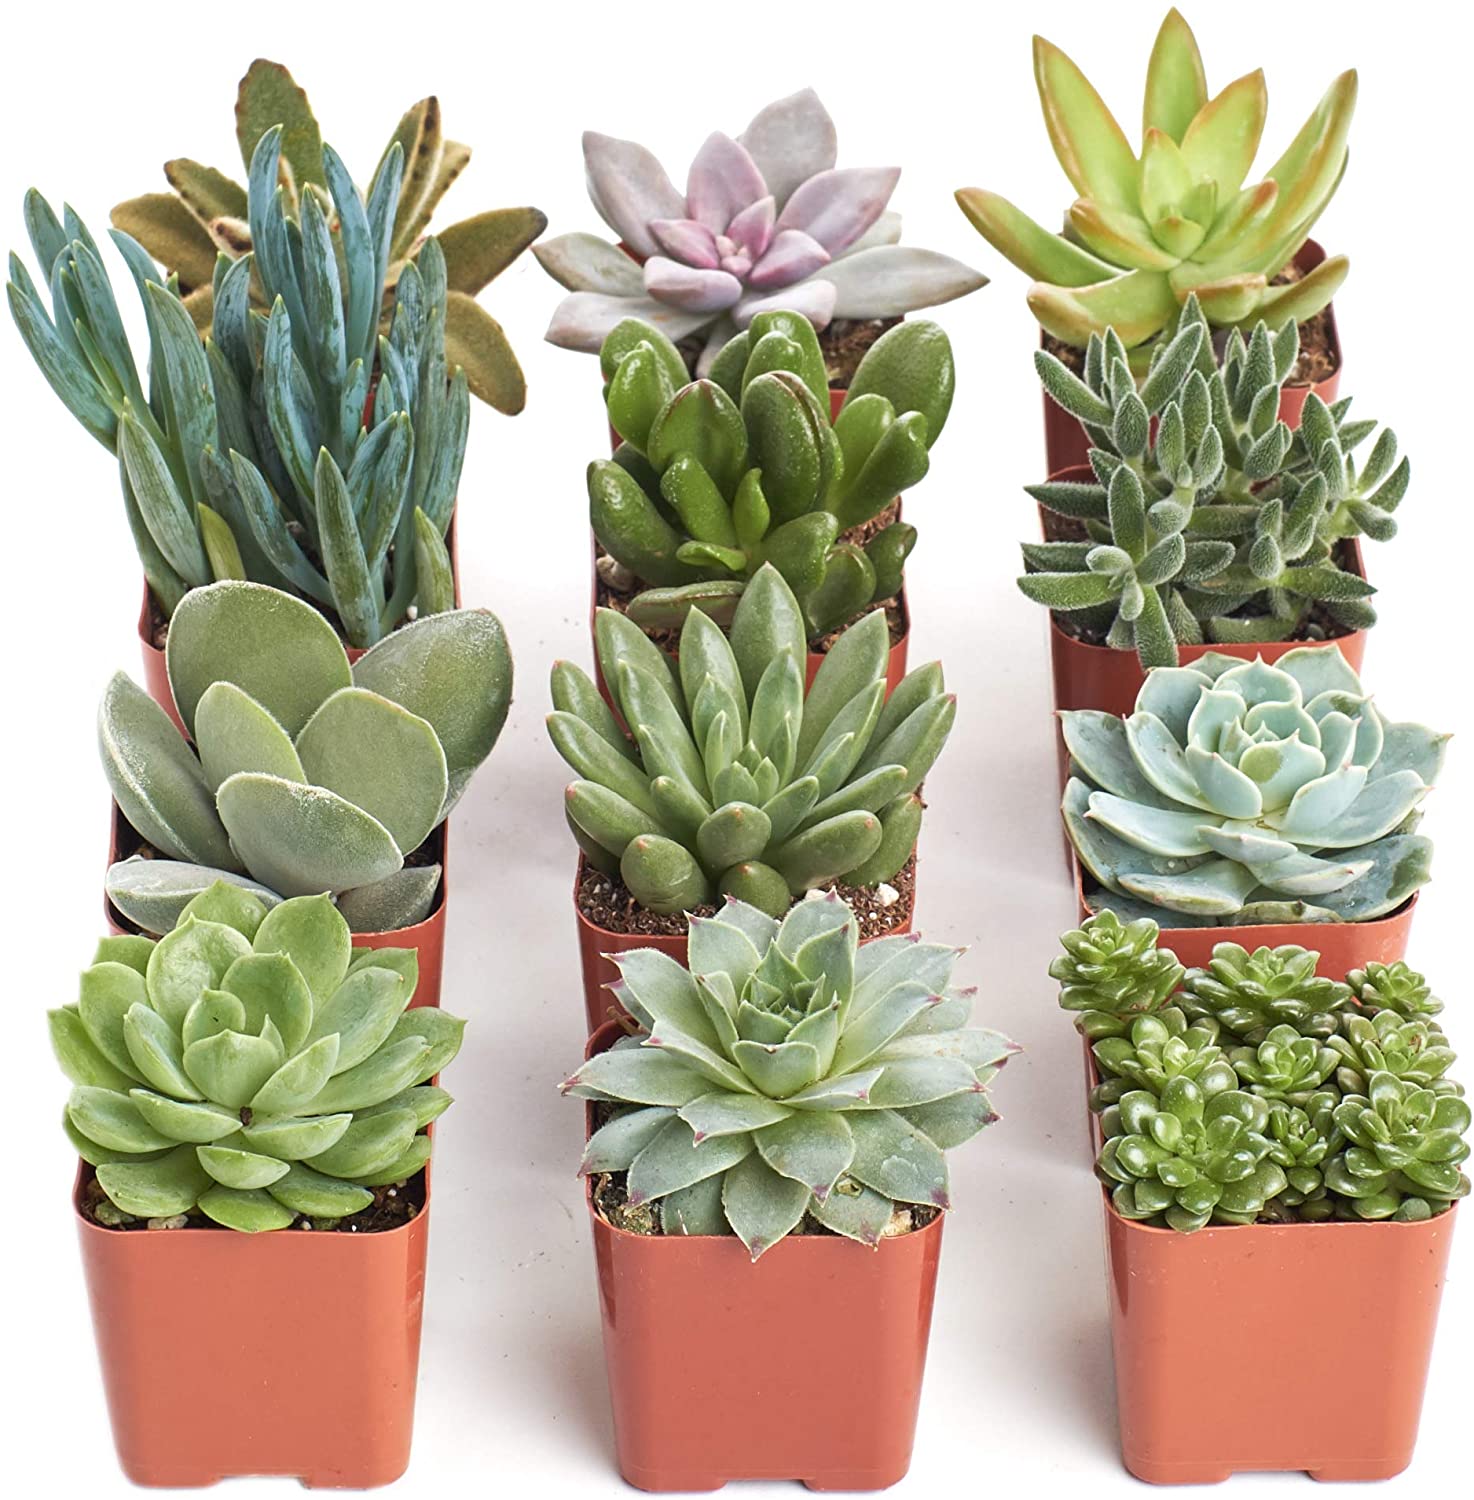 Shop Succulents Unique Live Plants Collection of 12 Hand Selected Variety Pack of Mini Succulents 